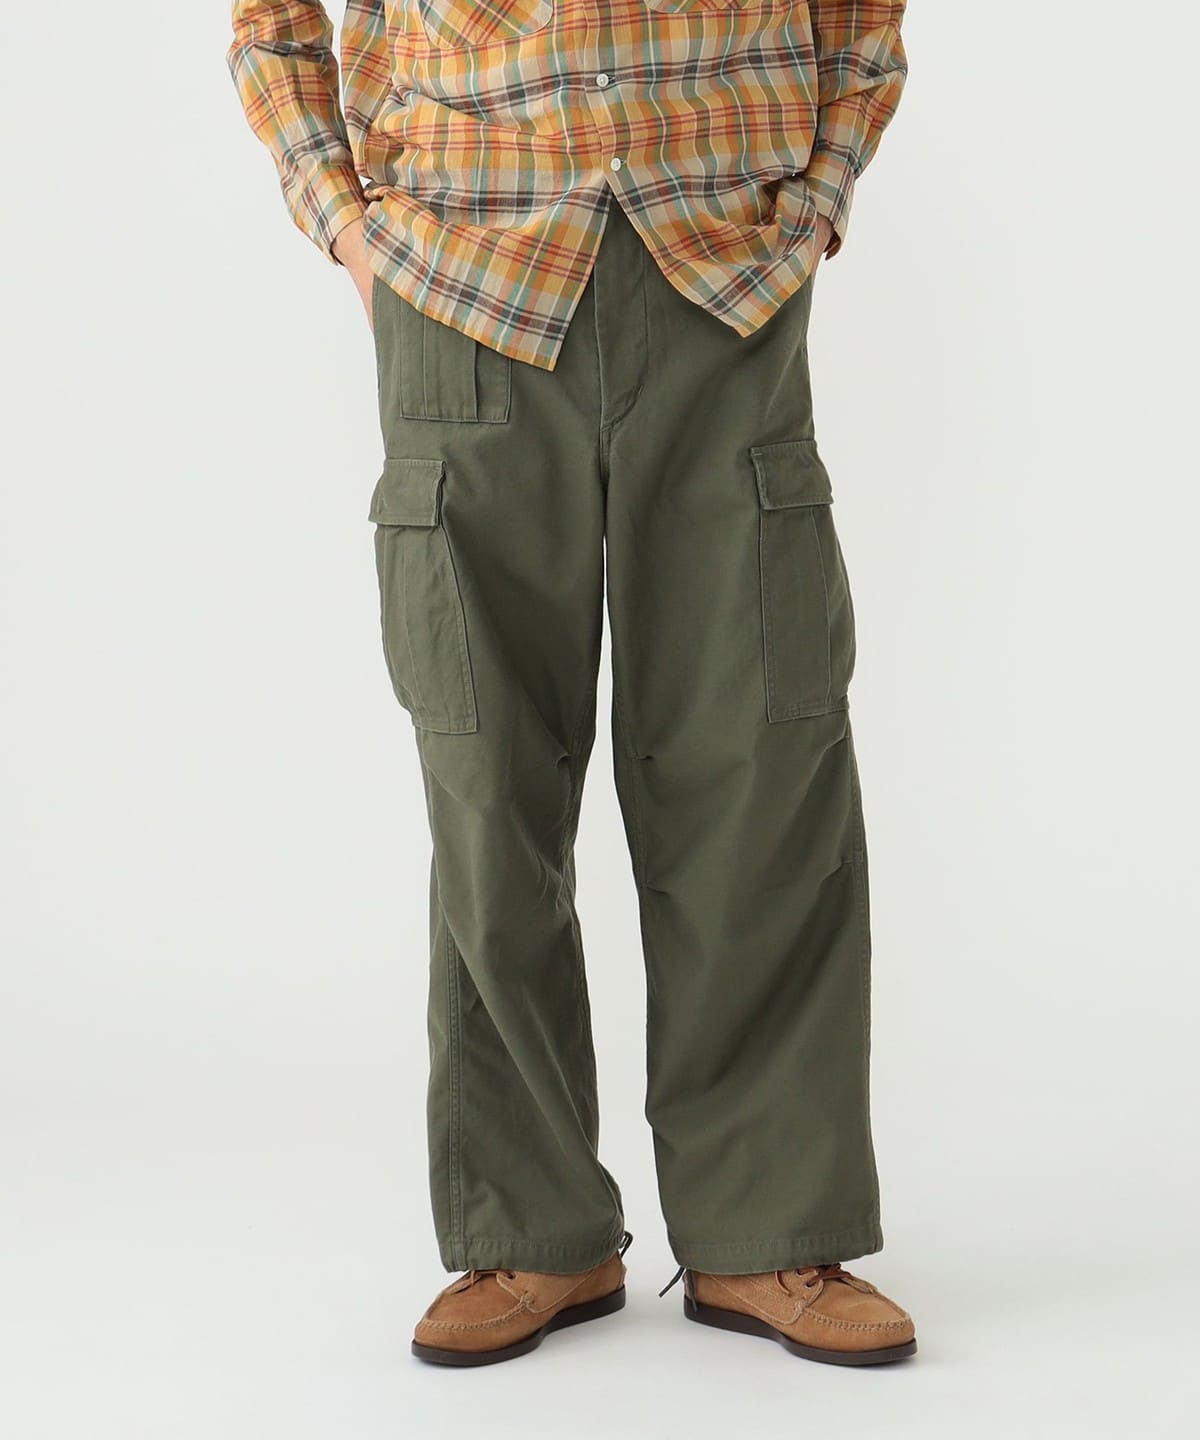 BEAMS PLUS（ビームス プラス）NIGEL CABOURN / ARMY CARGO PANT